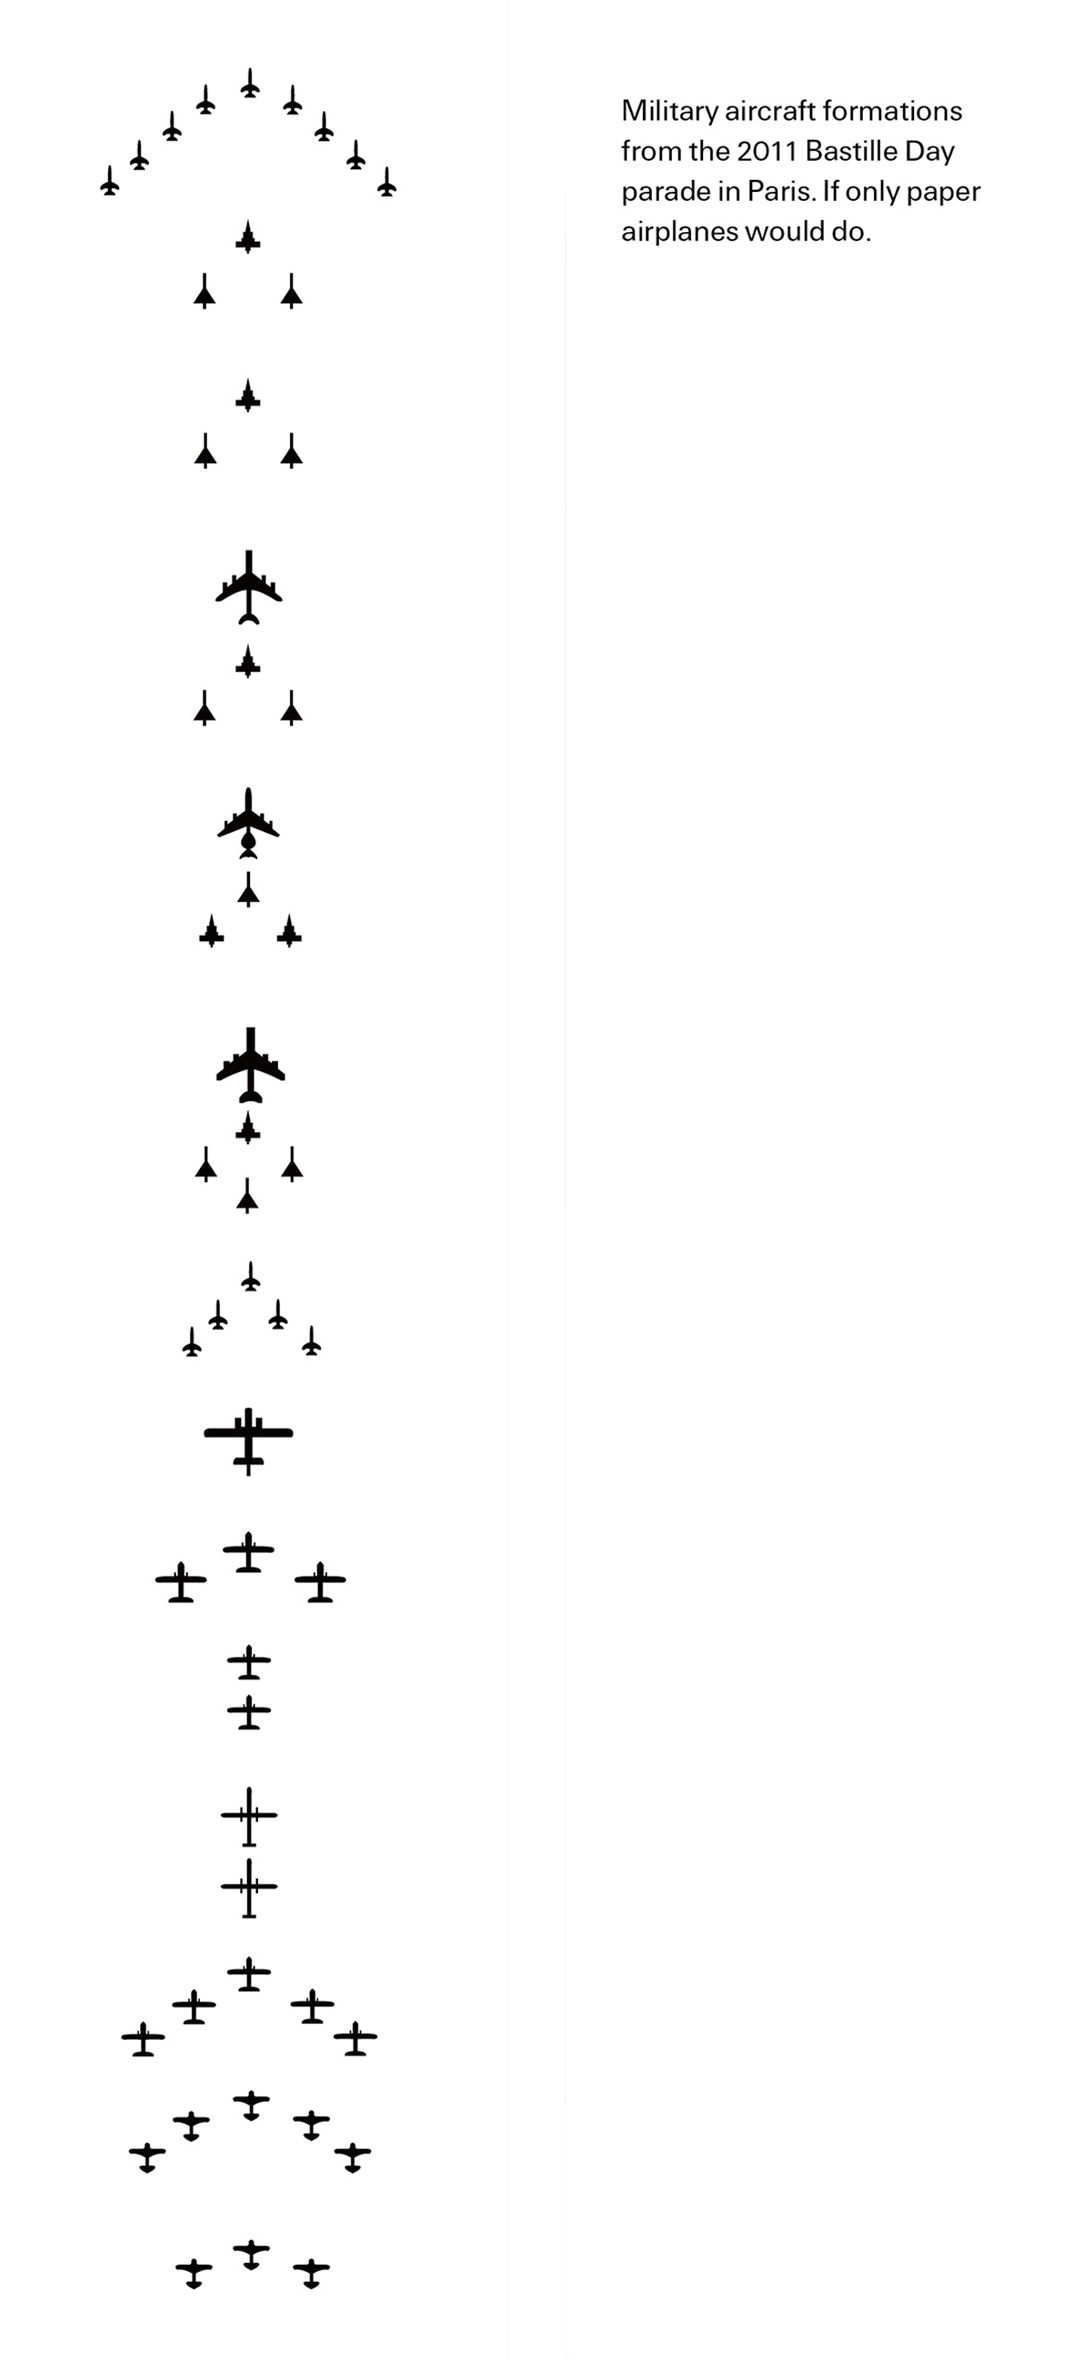 A bookmark depicting military aircraft formations. The back of the bookmark reads “Military aircraft formations from the two thousand and eleven Bastille Day parade in Paris. If only paper airplanes would do.”